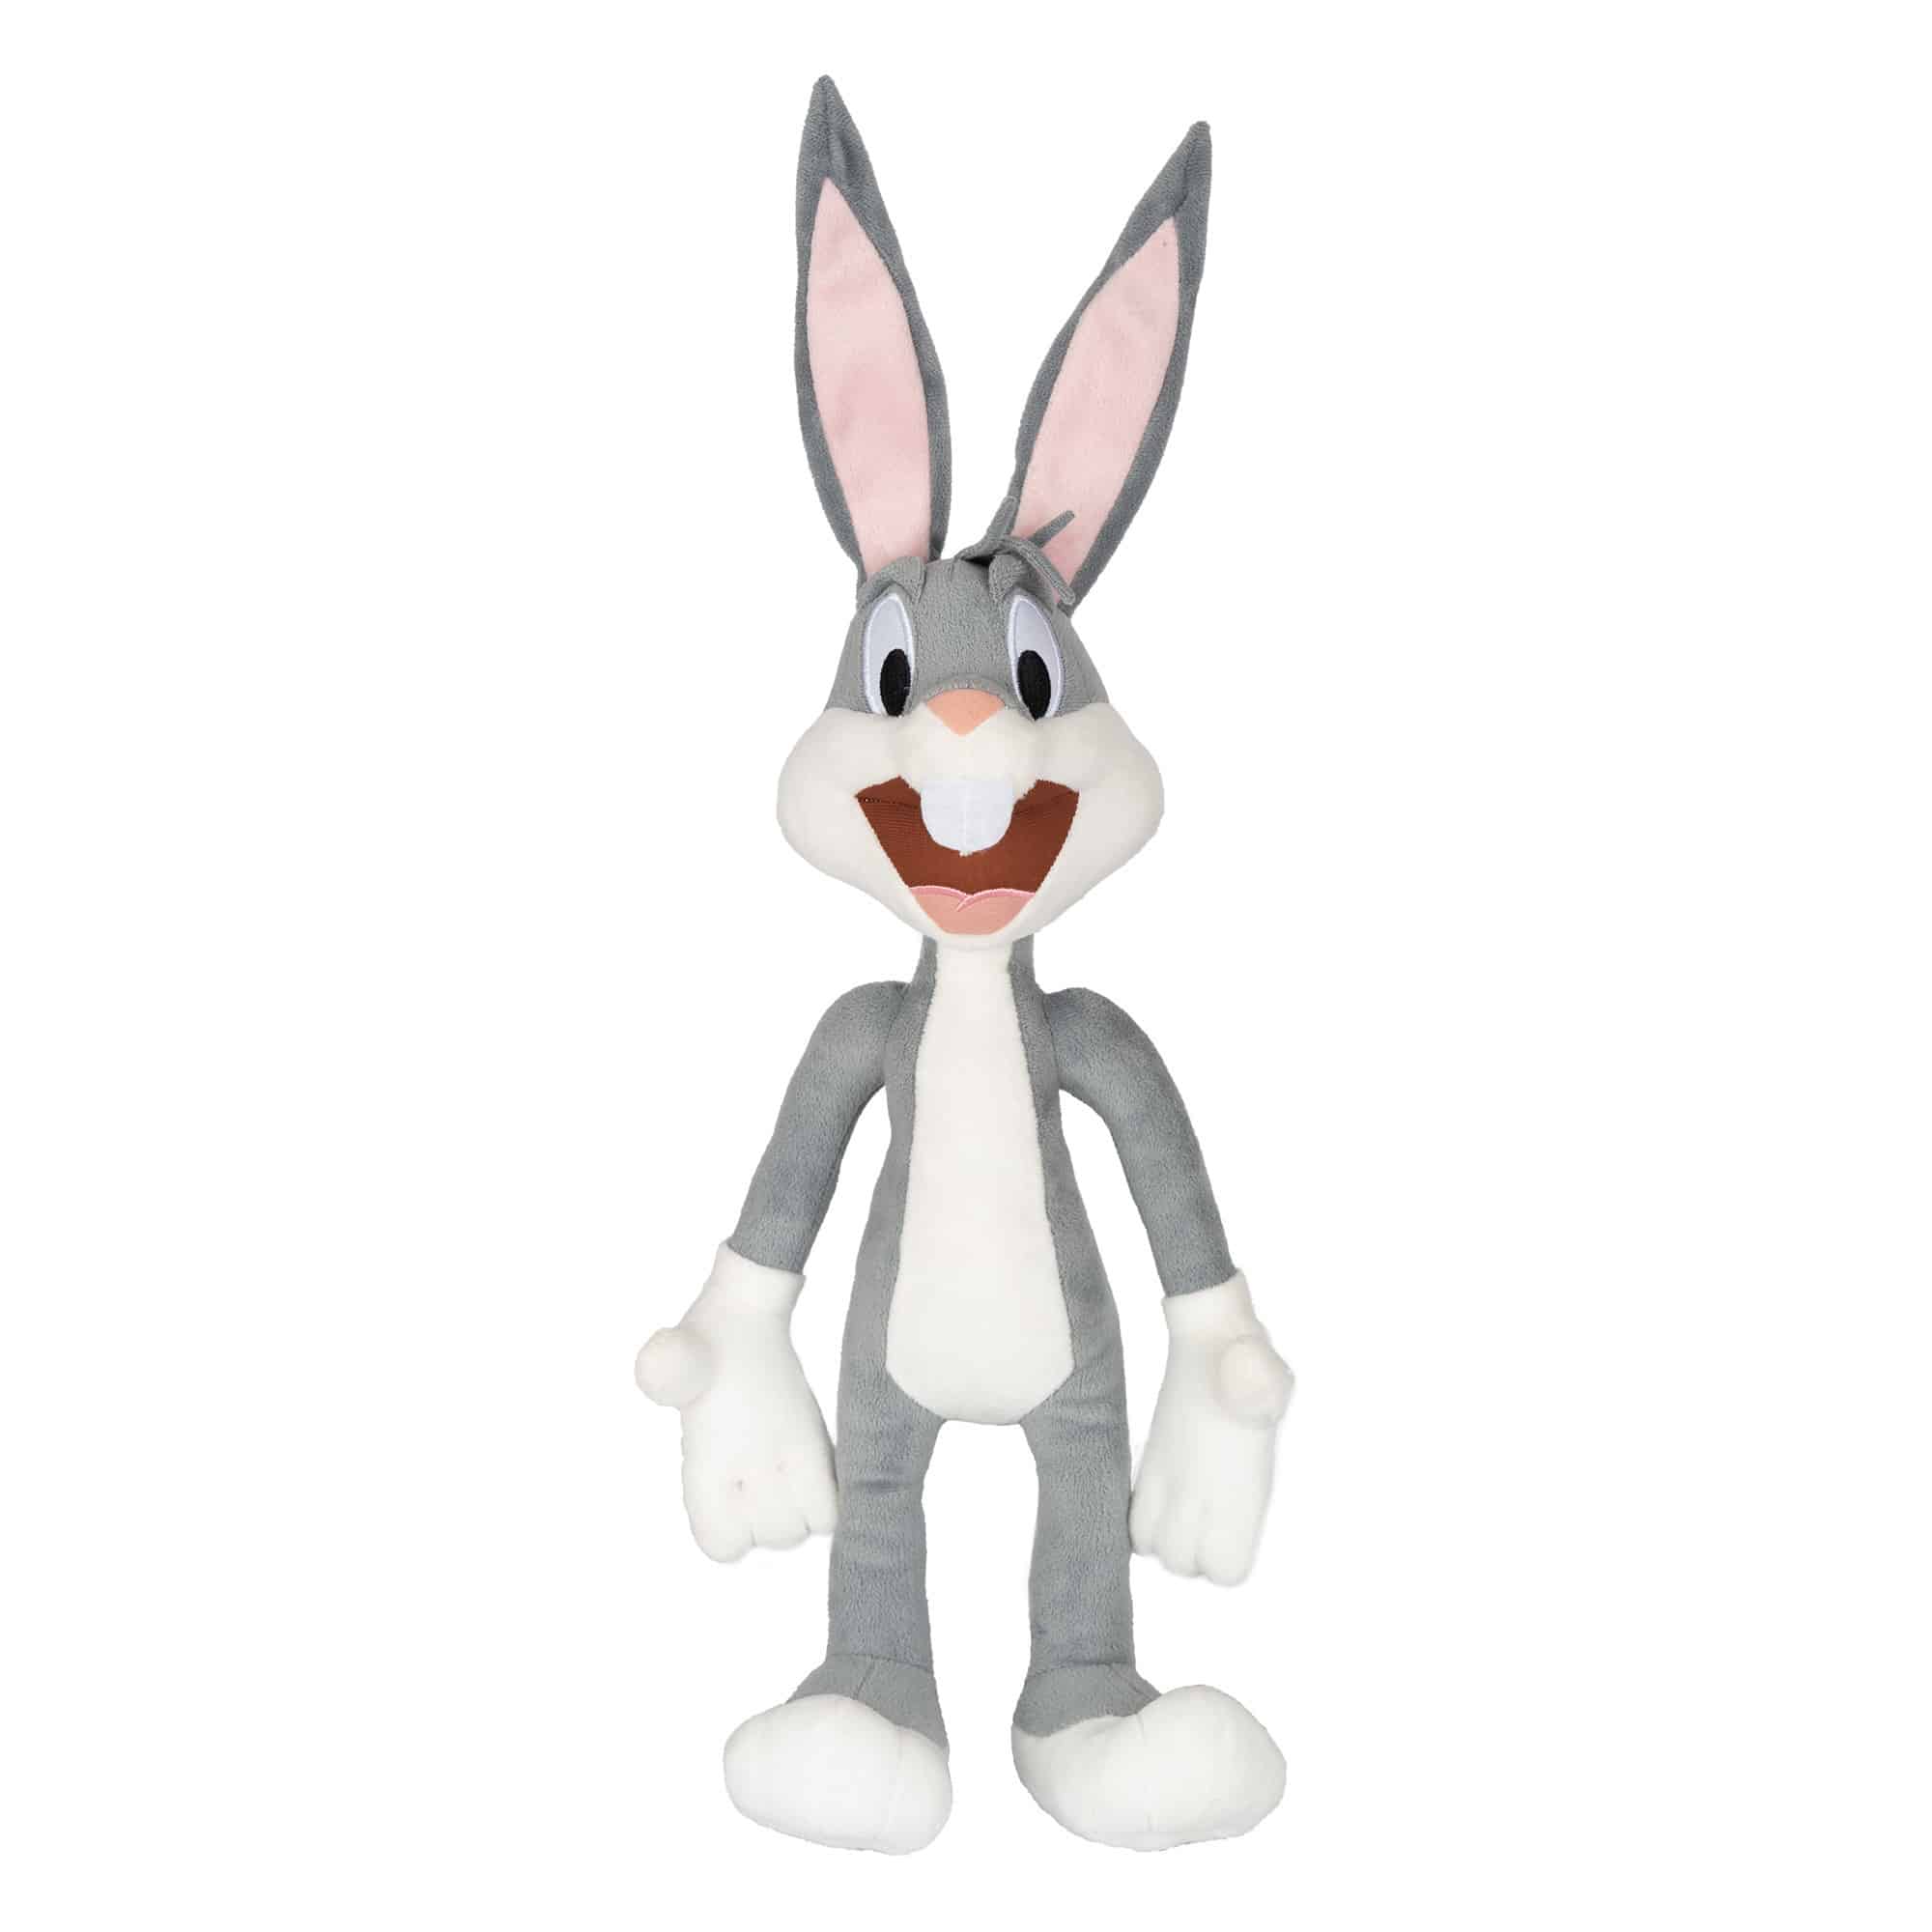 Looney Tunes - Limited Edition Plush - 12" Bugs Bunny